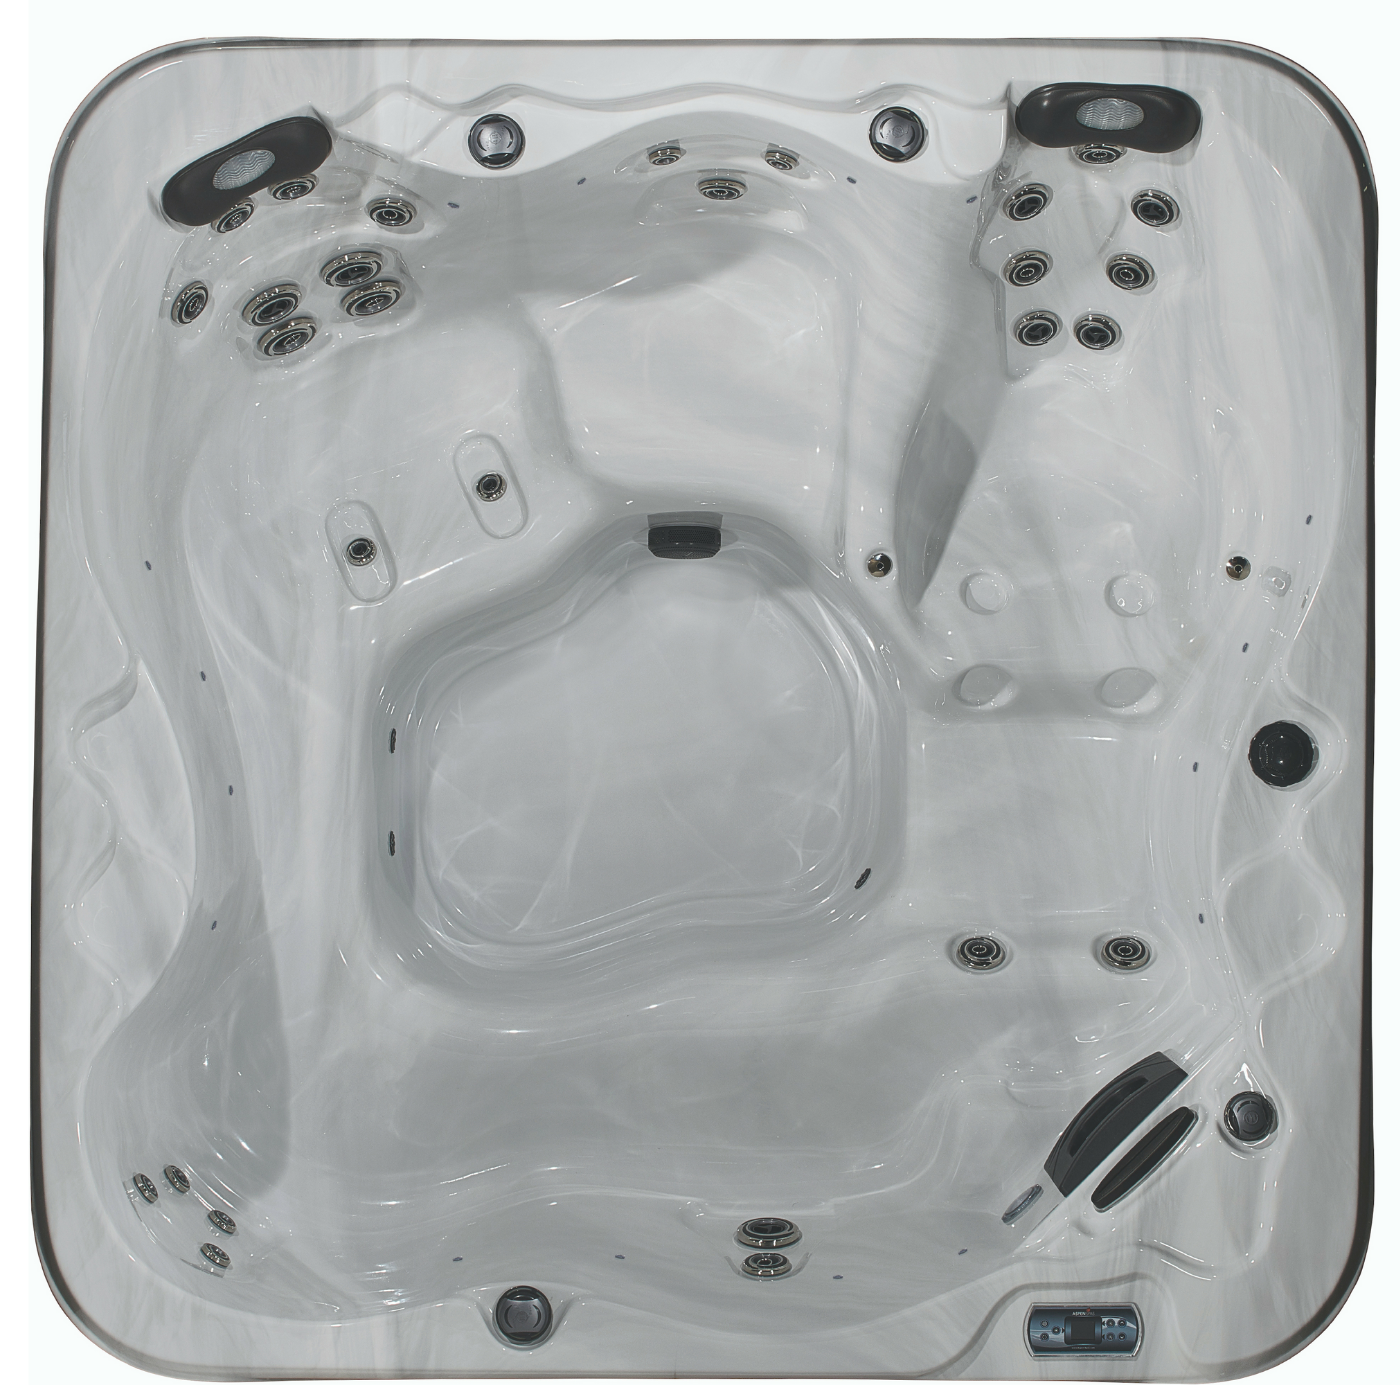 Obsession II Hot Tub by Aspen Spas